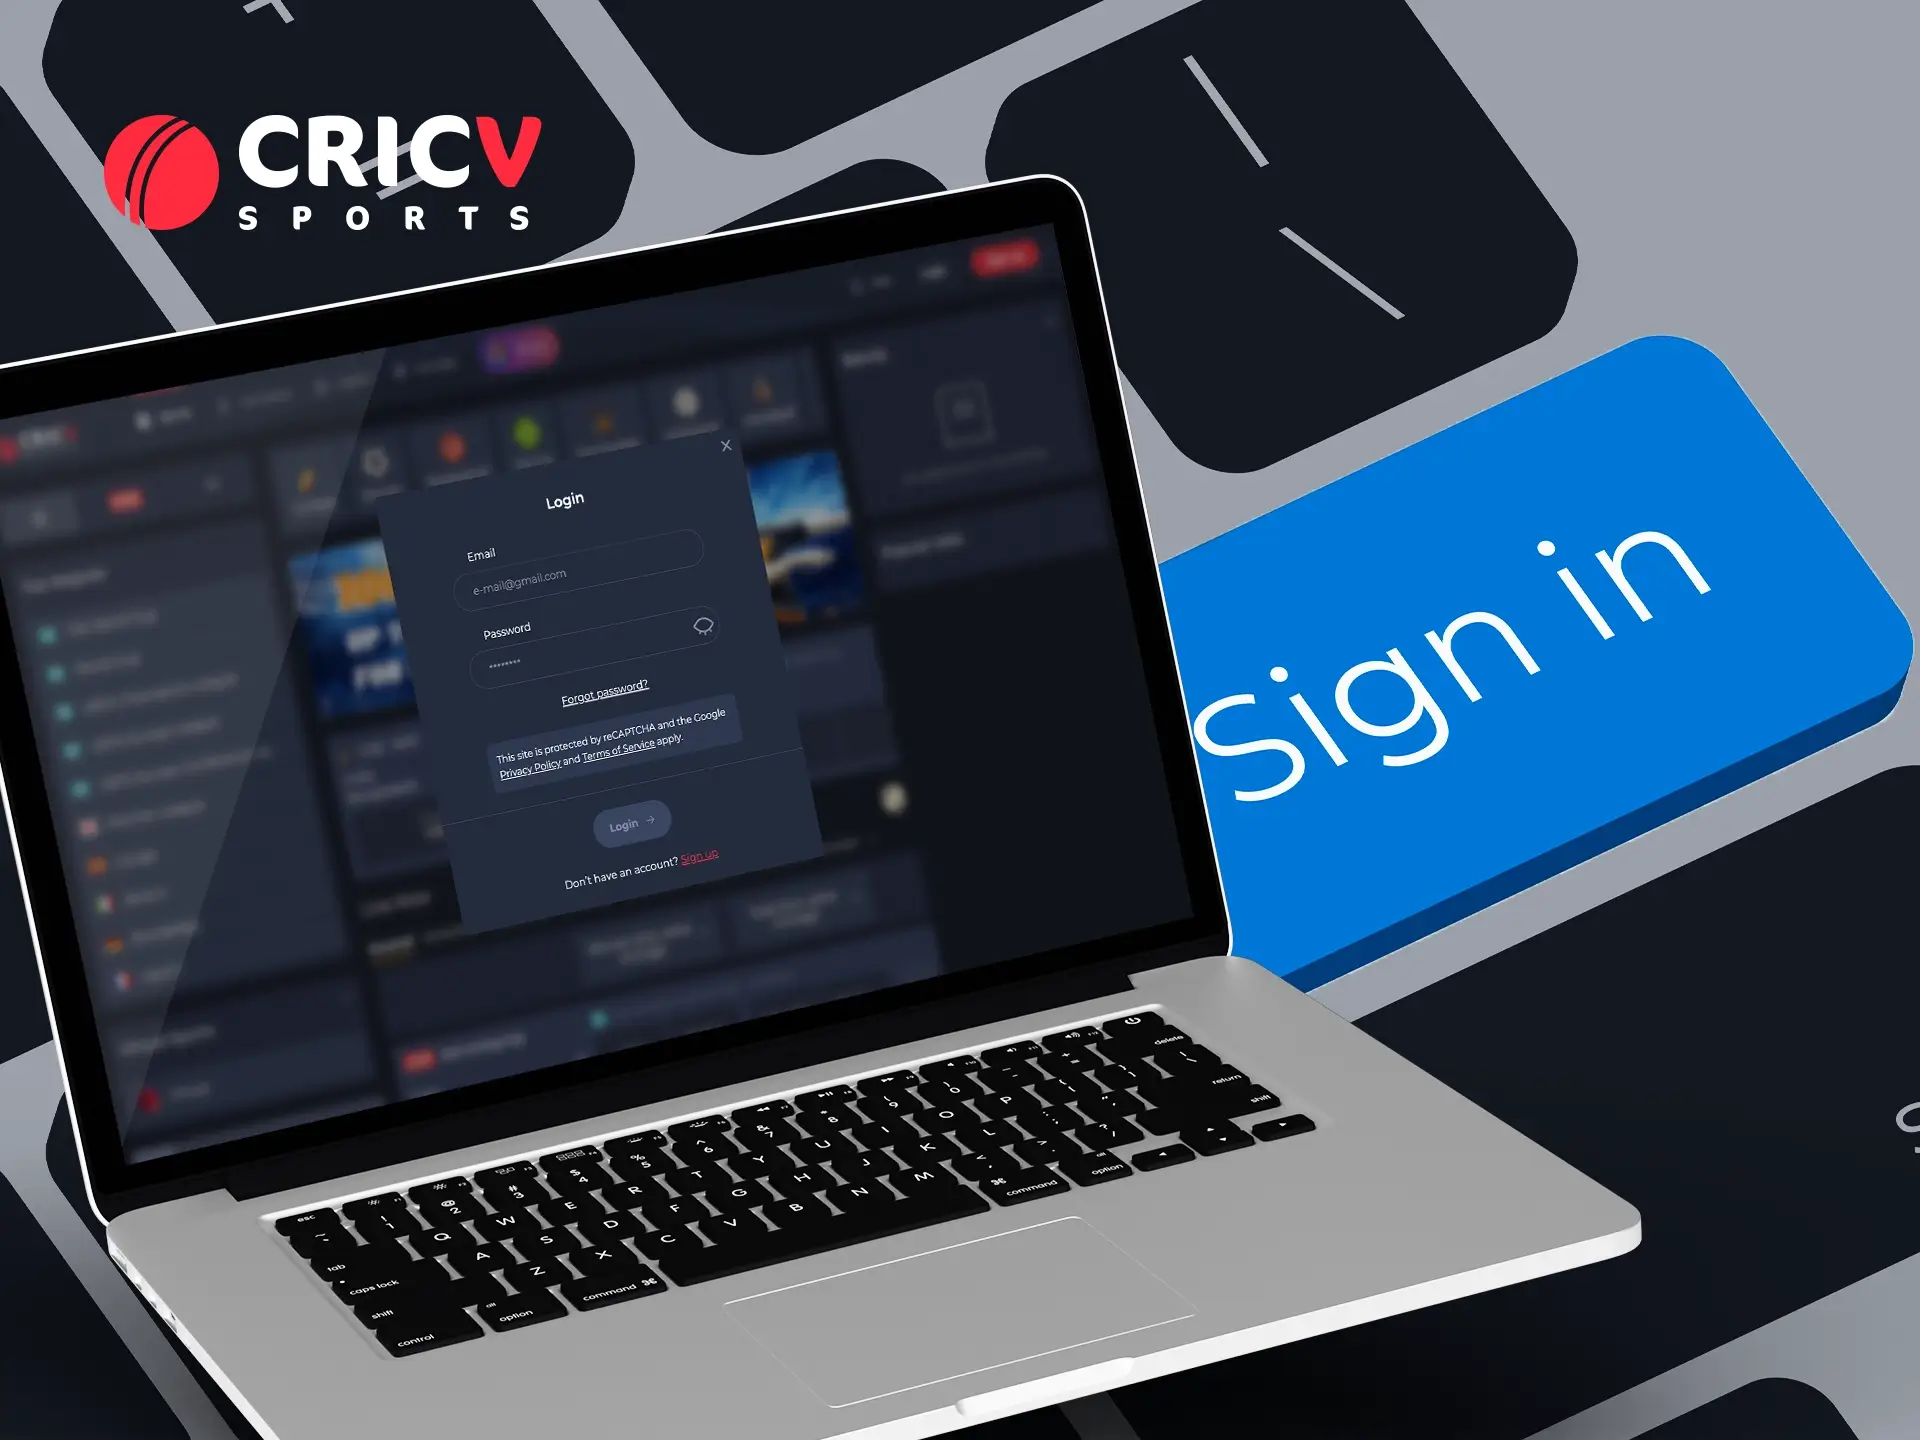 The Cricv login is a simple form to fill out.